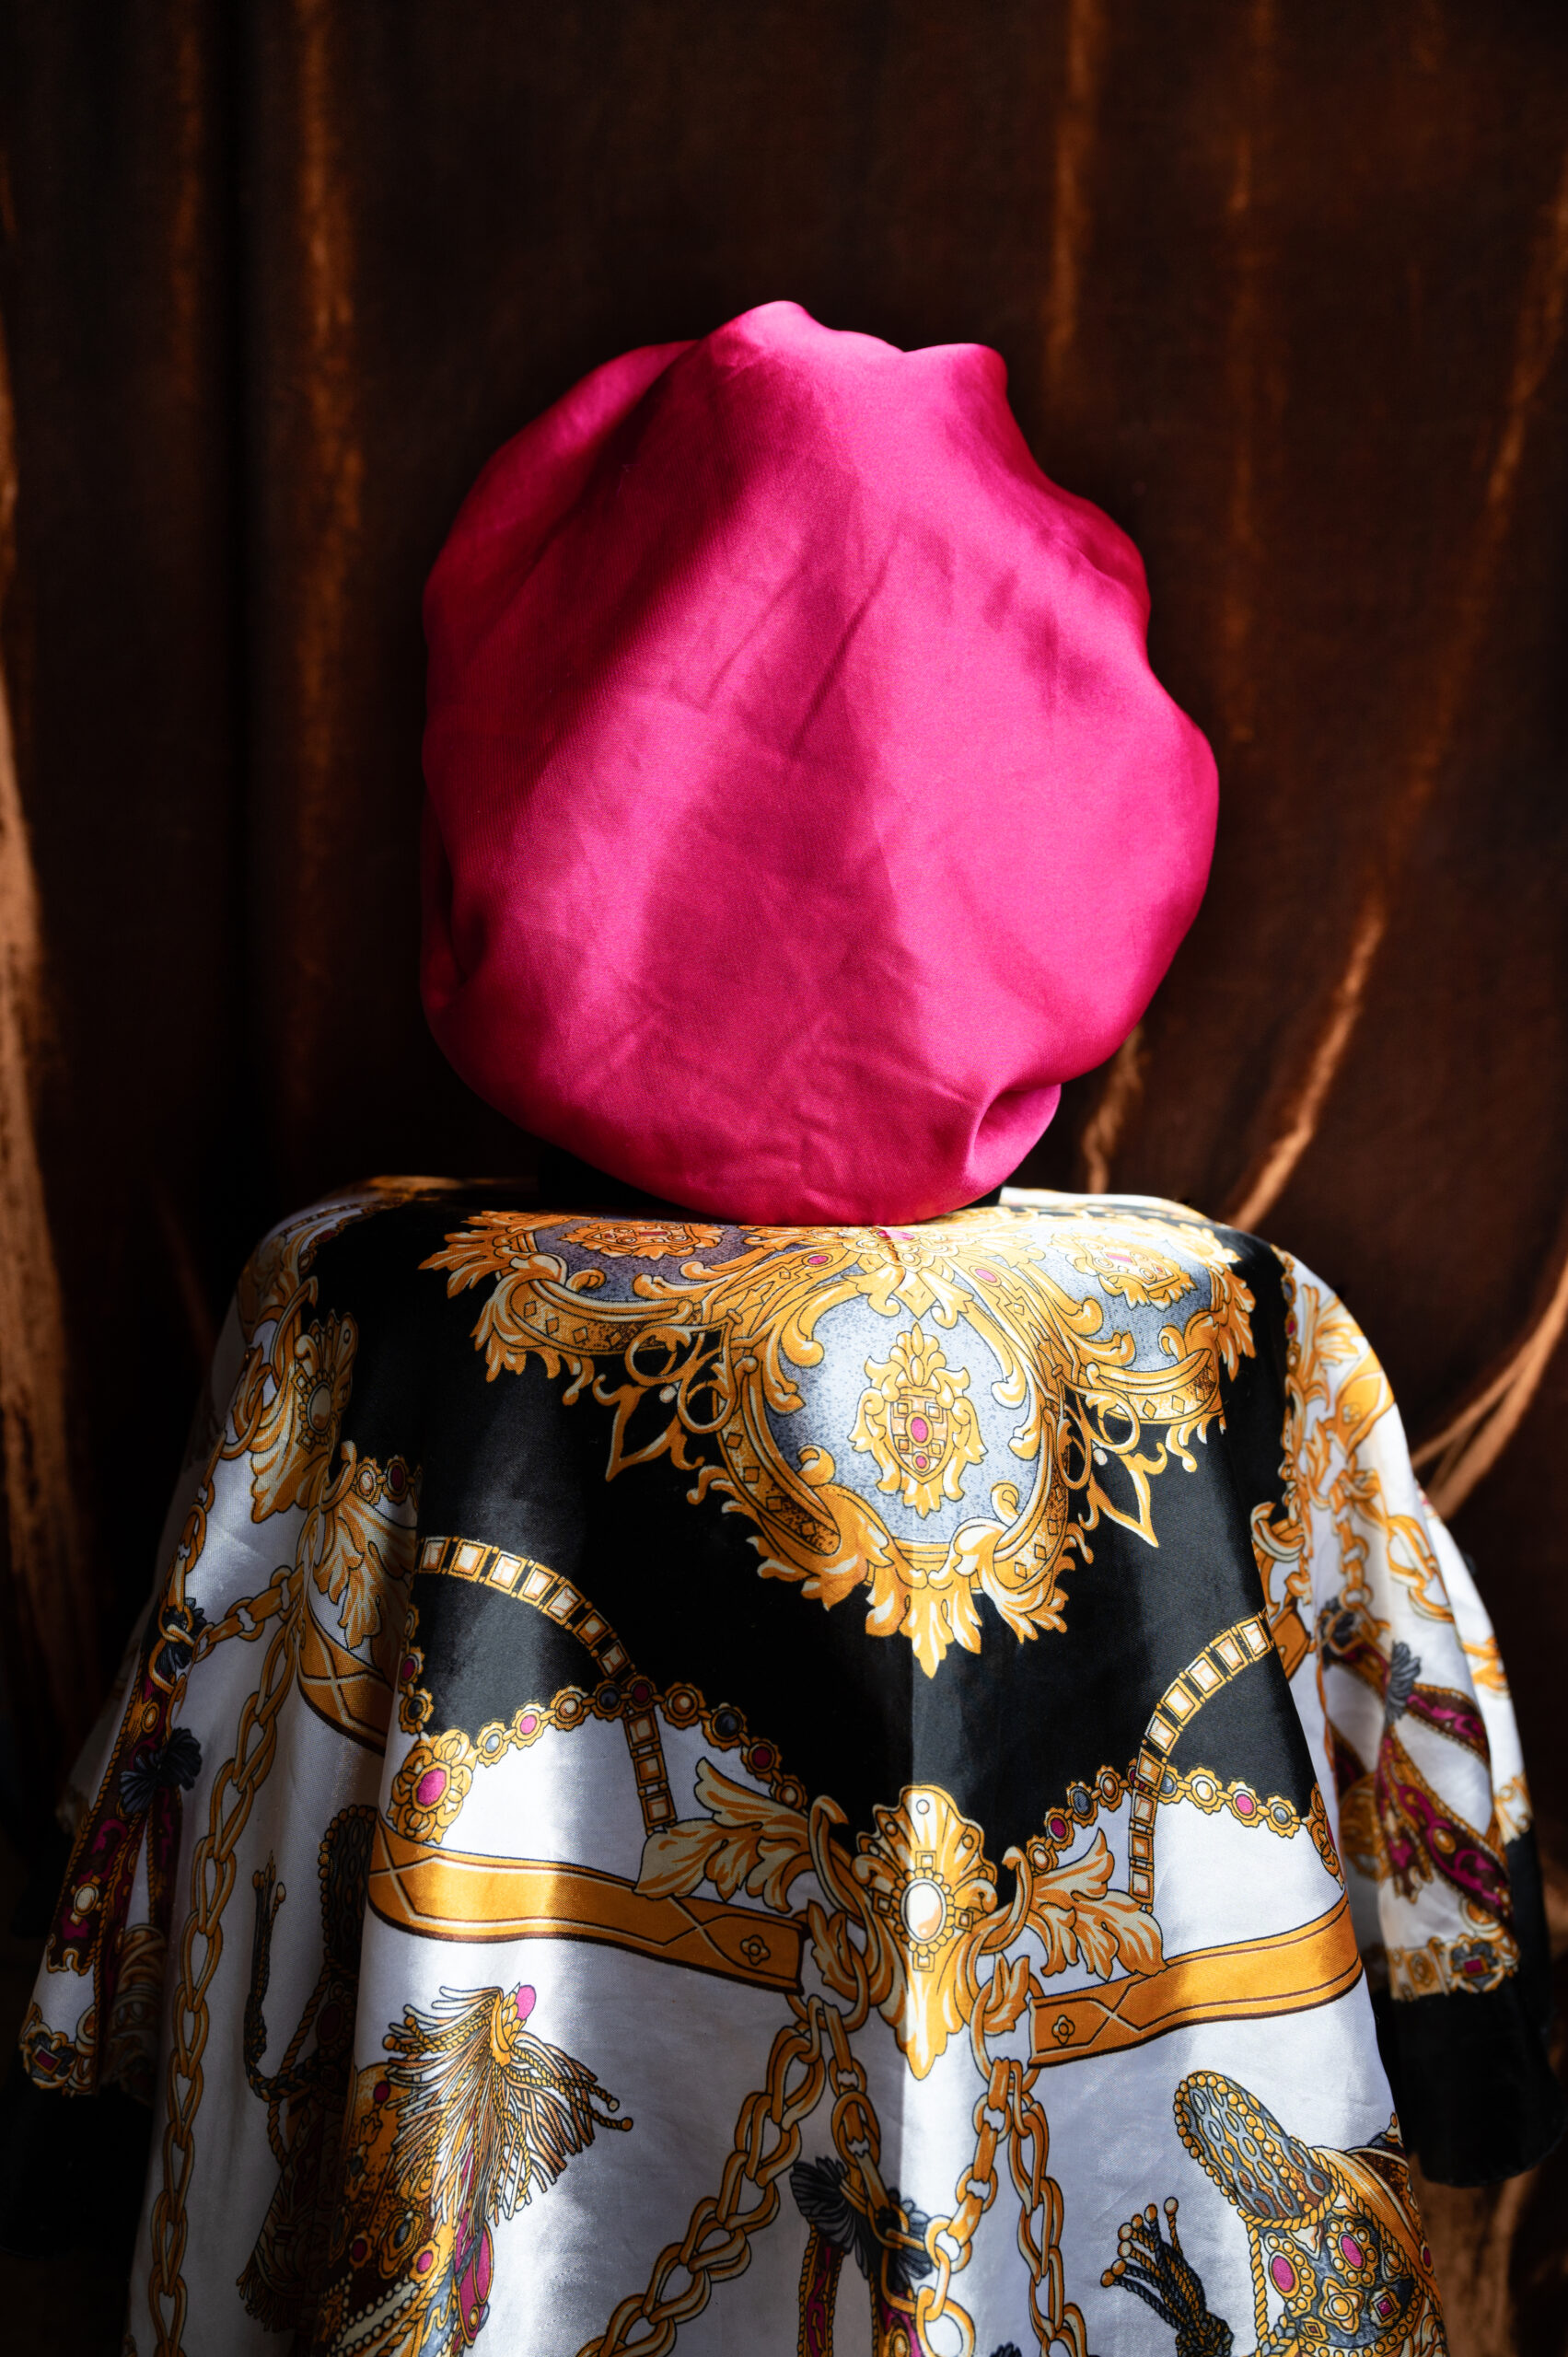 A bright pink bonnet resting atop a table covered in an elegant patterned scarf.